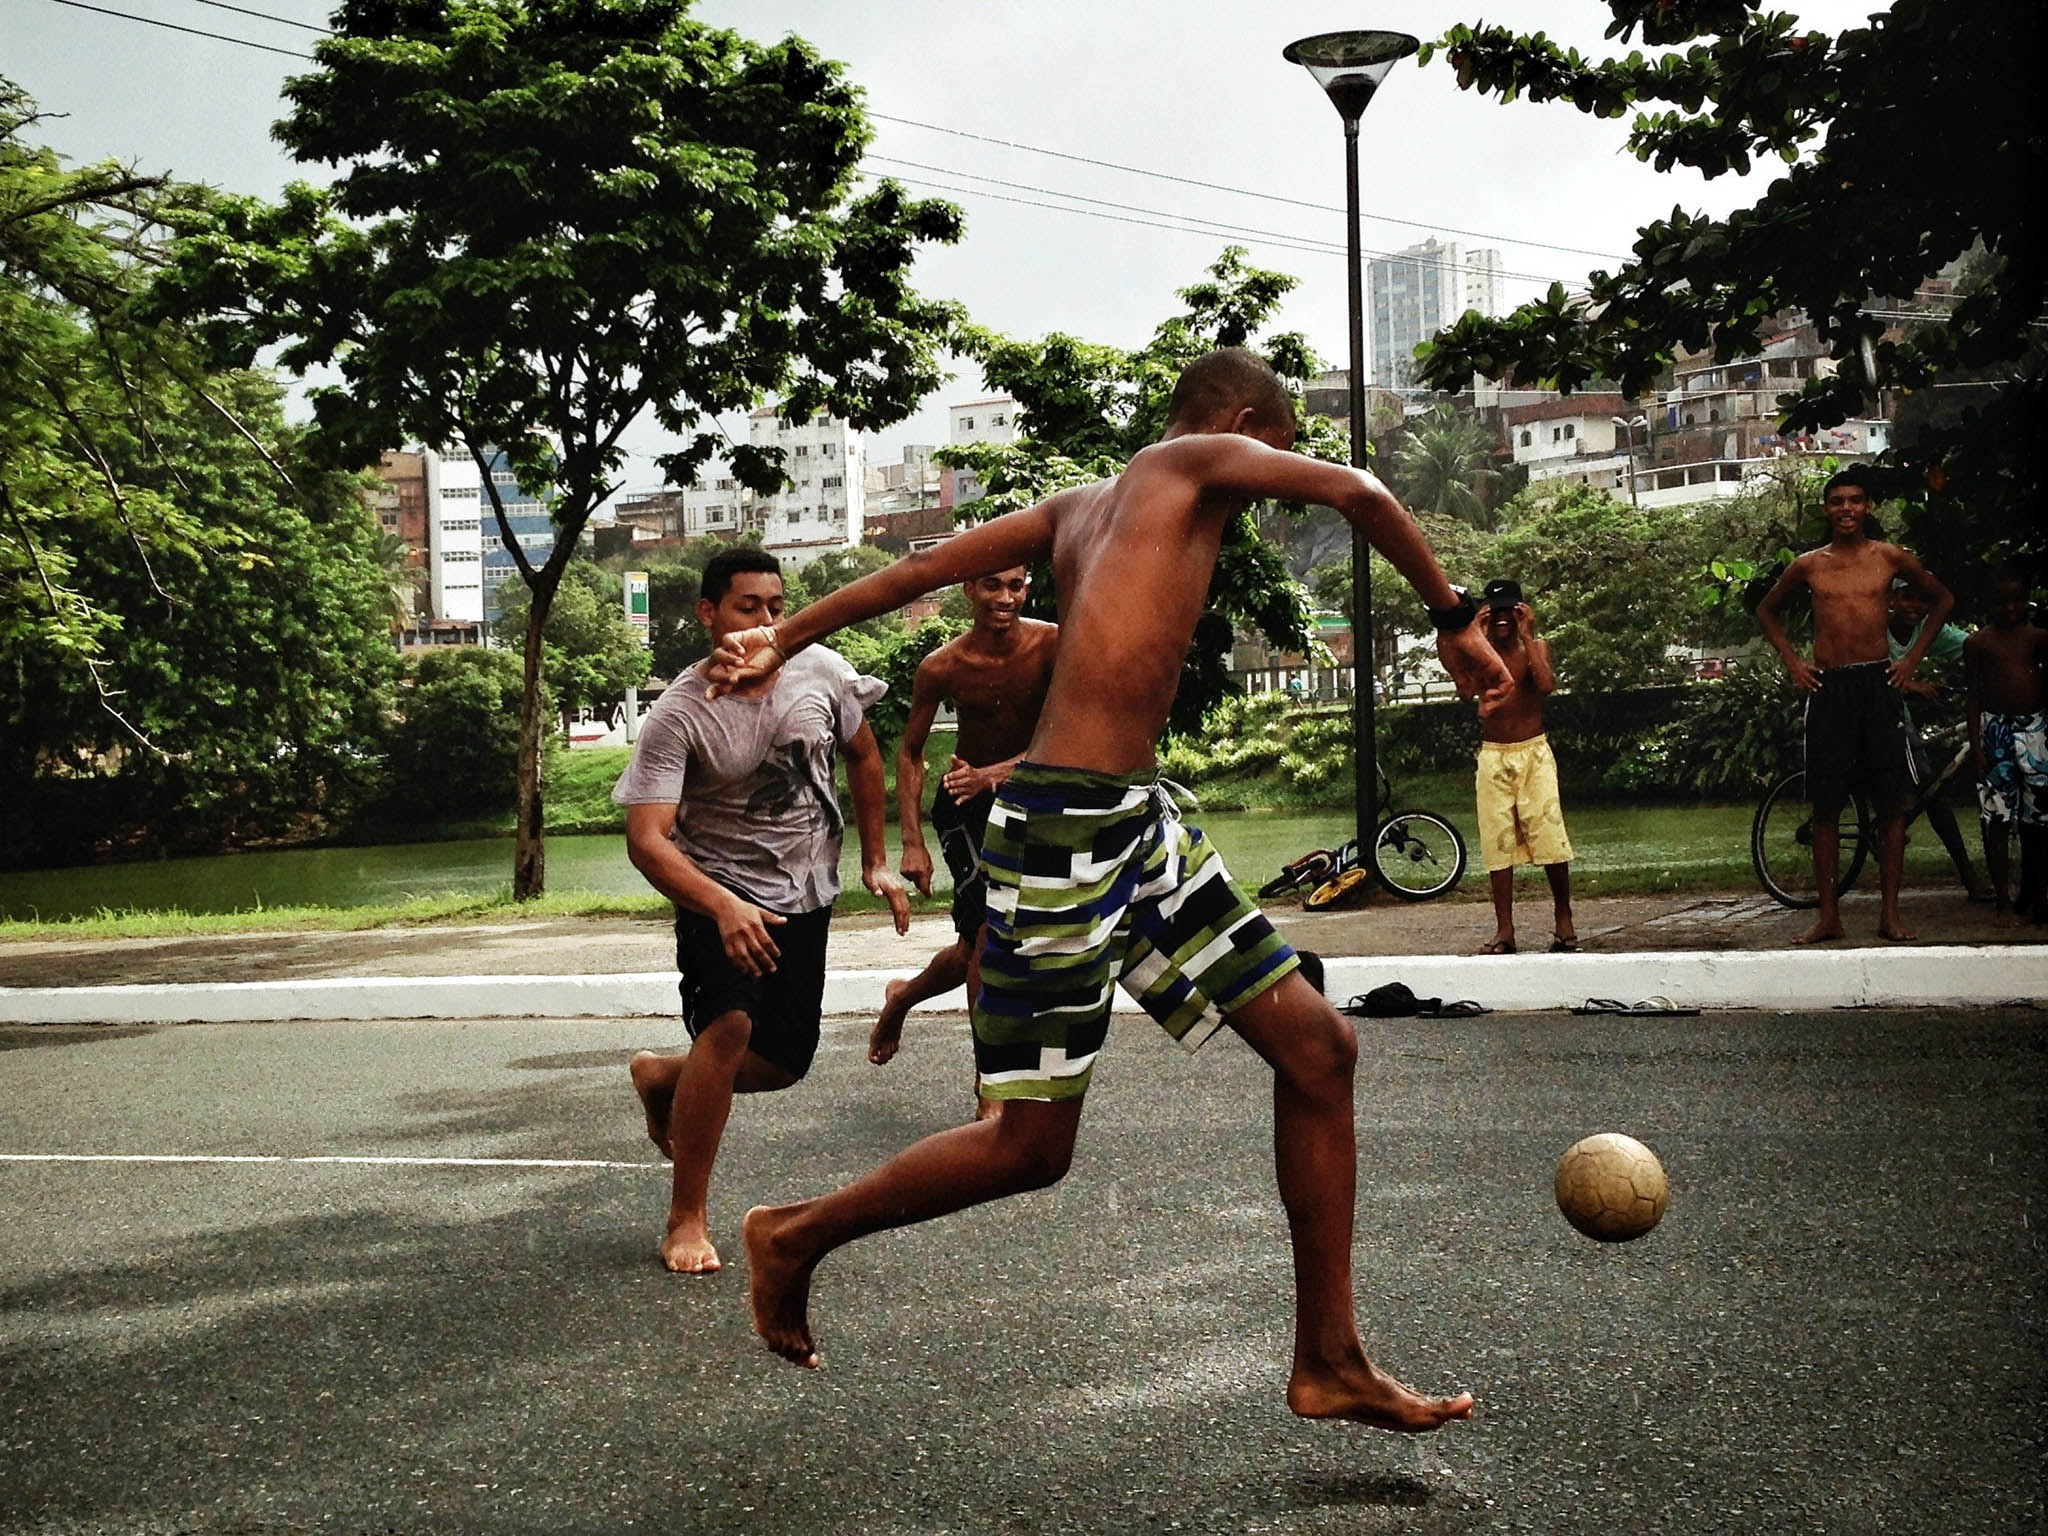 boys playing street football during the FIFA Confederations Cup Brazil 2013